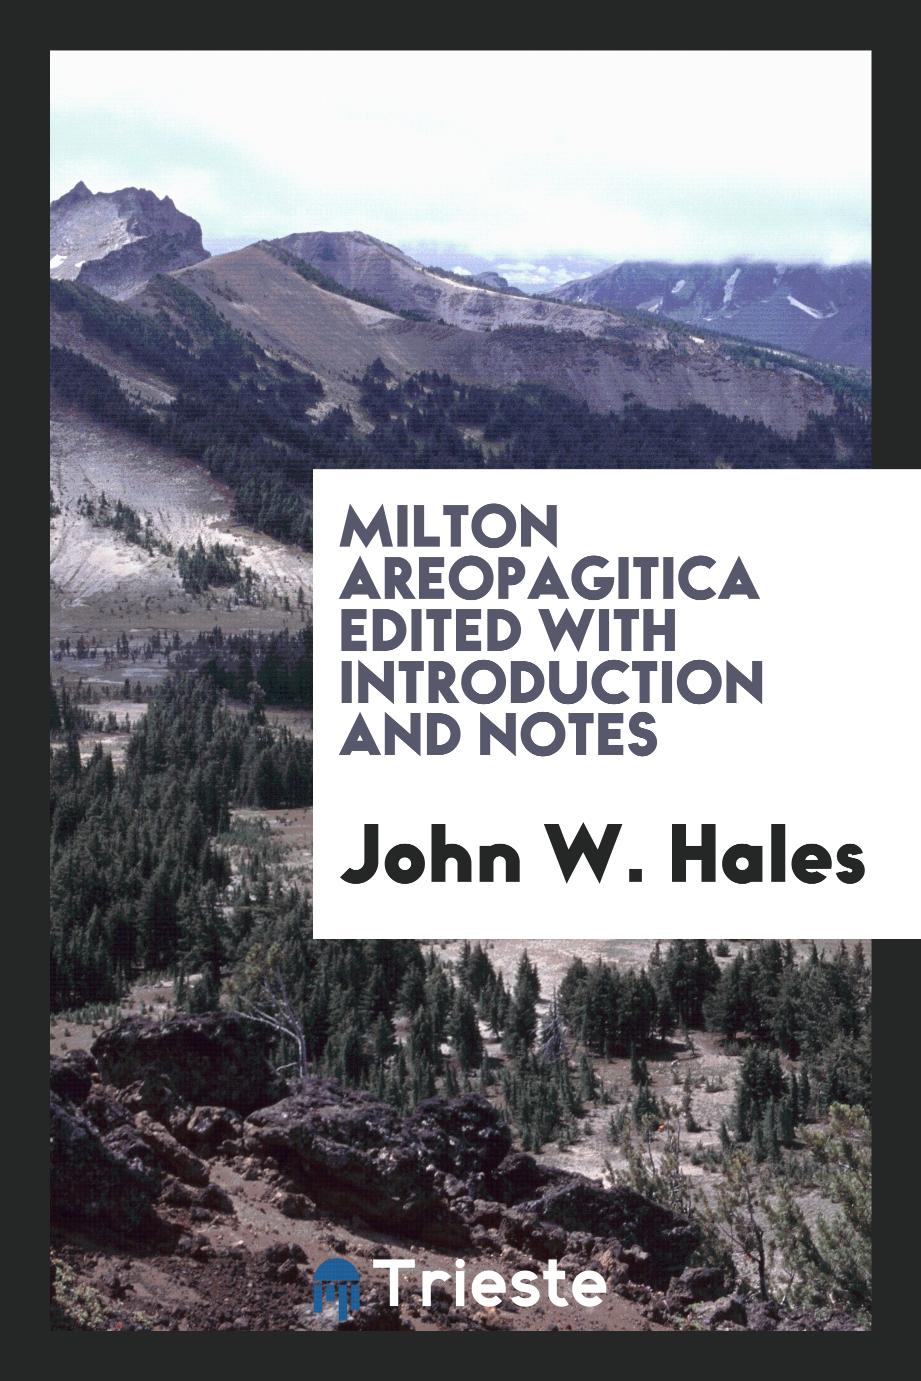 Milton Areopagitica edited with introduction and notes